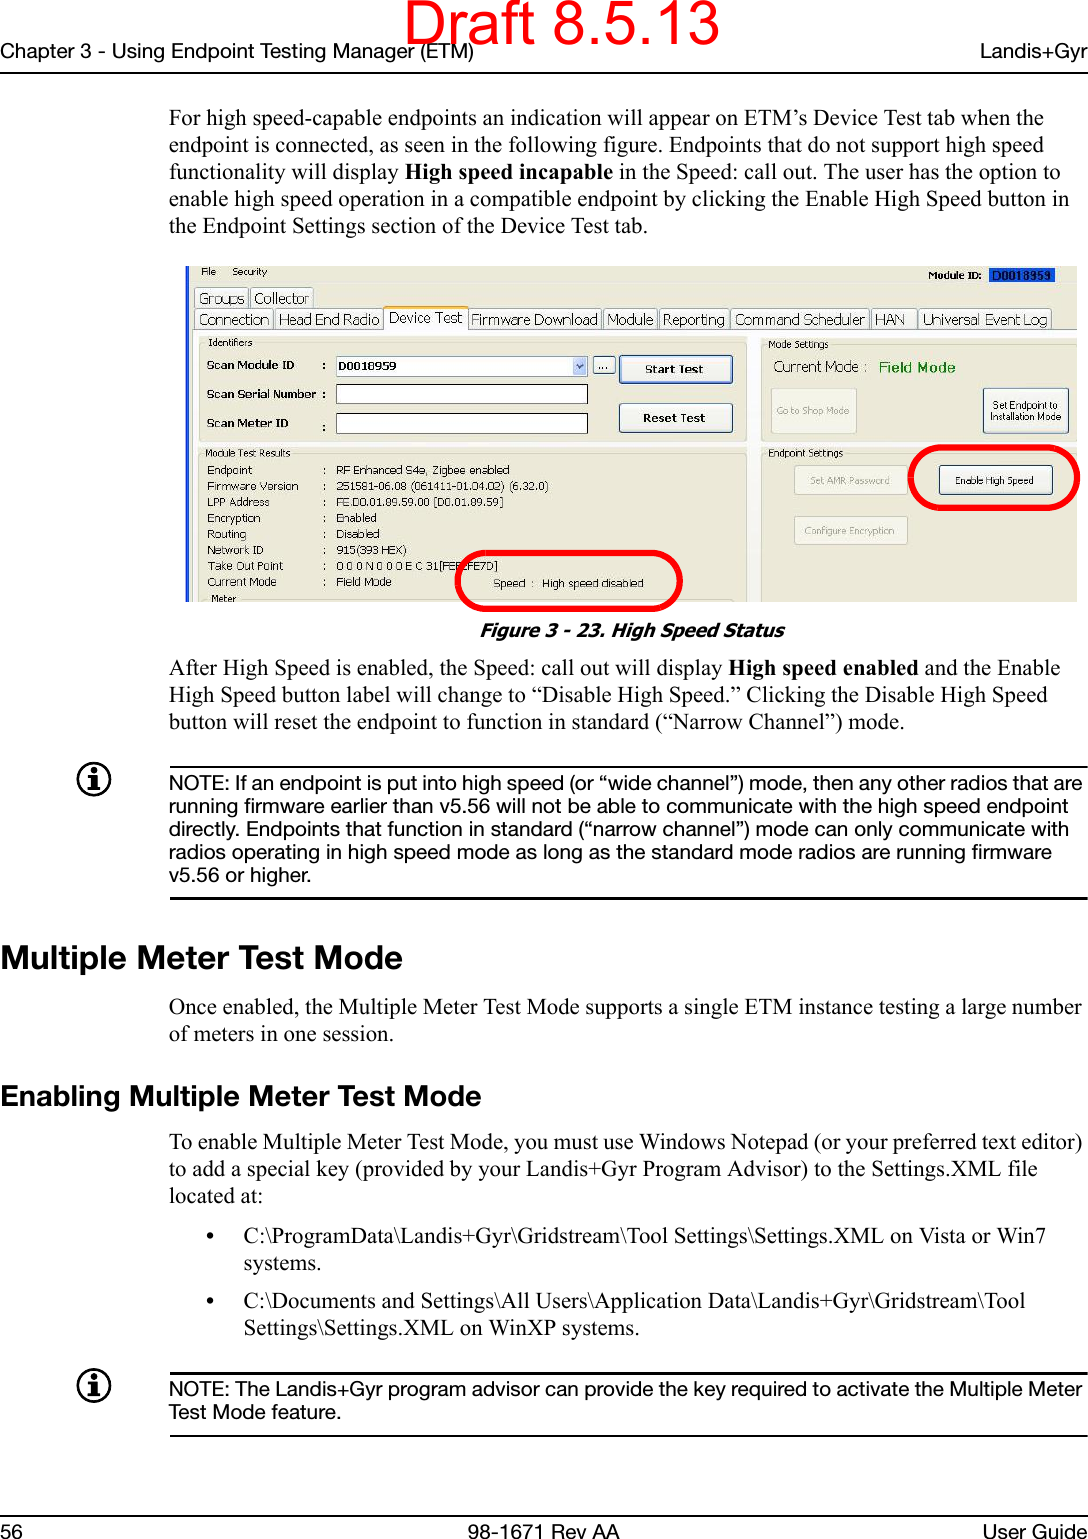 Chapter 3 - Using Endpoint Testing Manager (ETM) Landis+Gyr56 98-1671 Rev AA User GuideFor high speed-capable endpoints an indication will appear on ETM’s Device Test tab when the endpoint is connected, as seen in the following figure. Endpoints that do not support high speed functionality will display High speed incapable in the Speed: call out. The user has the option to enable high speed operation in a compatible endpoint by clicking the Enable High Speed button in the Endpoint Settings section of the Device Test tab. Figure 3 - 23. High Speed StatusAfter High Speed is enabled, the Speed: call out will display High speed enabled and the Enable High Speed button label will change to “Disable High Speed.” Clicking the Disable High Speed button will reset the endpoint to function in standard (“Narrow Channel”) mode.NOTE: If an endpoint is put into high speed (or “wide channel”) mode, then any other radios that are running firmware earlier than v5.56 will not be able to communicate with the high speed endpoint directly. Endpoints that function in standard (“narrow channel”) mode can only communicate with radios operating in high speed mode as long as the standard mode radios are running firmware v5.56 or higher.Multiple Meter Test ModeOnce enabled, the Multiple Meter Test Mode supports a single ETM instance testing a large number of meters in one session. Enabling Multiple Meter Test ModeTo enable Multiple Meter Test Mode, you must use Windows Notepad (or your preferred text editor) to add a special key (provided by your Landis+Gyr Program Advisor) to the Settings.XML file located at: •C:\ProgramData\Landis+Gyr\Gridstream\Tool Settings\Settings.XML on Vista or Win7 systems.•C:\Documents and Settings\All Users\Application Data\Landis+Gyr\Gridstream\Tool Settings\Settings.XML on WinXP systems.NOTE: The Landis+Gyr program advisor can provide the key required to activate the Multiple Meter Test Mode feature.Draft 8.5.13